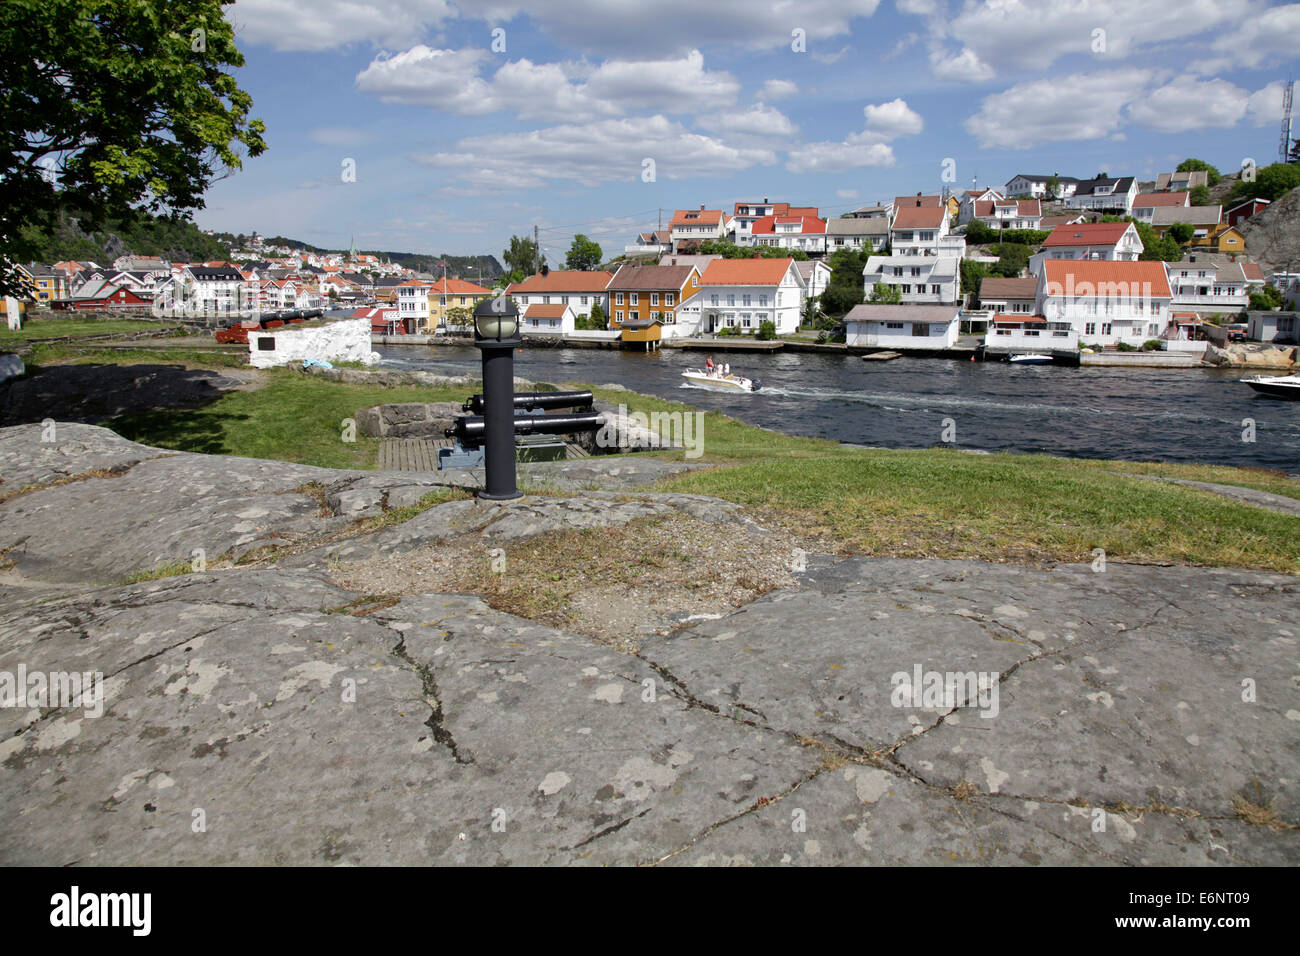 Narrow alleys and picturesque colorful wooden houses characterize Kragerø that spread over three islands on the south coast of Norway on Skaggerak. Photo: Klaus Nowottnick Date: May 30, 2014 Stock Photo